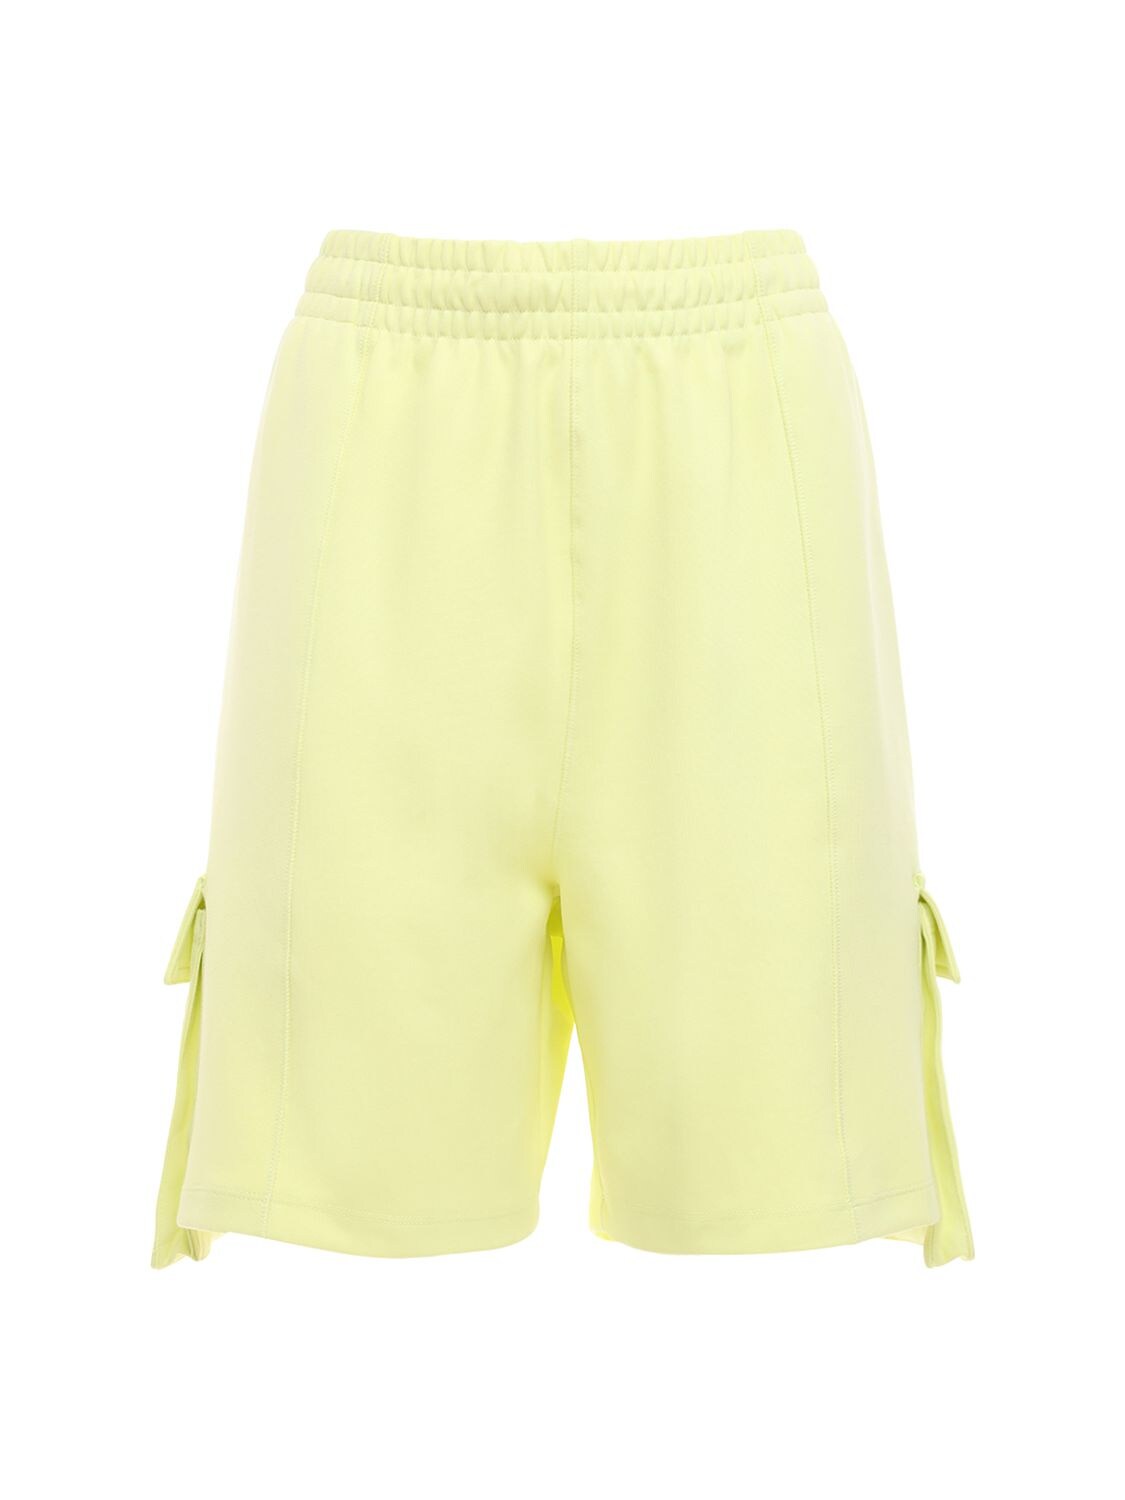 Adidas X Ivy Park Ivy Park Cotton Blend 4all Shorts In Yellow Tint